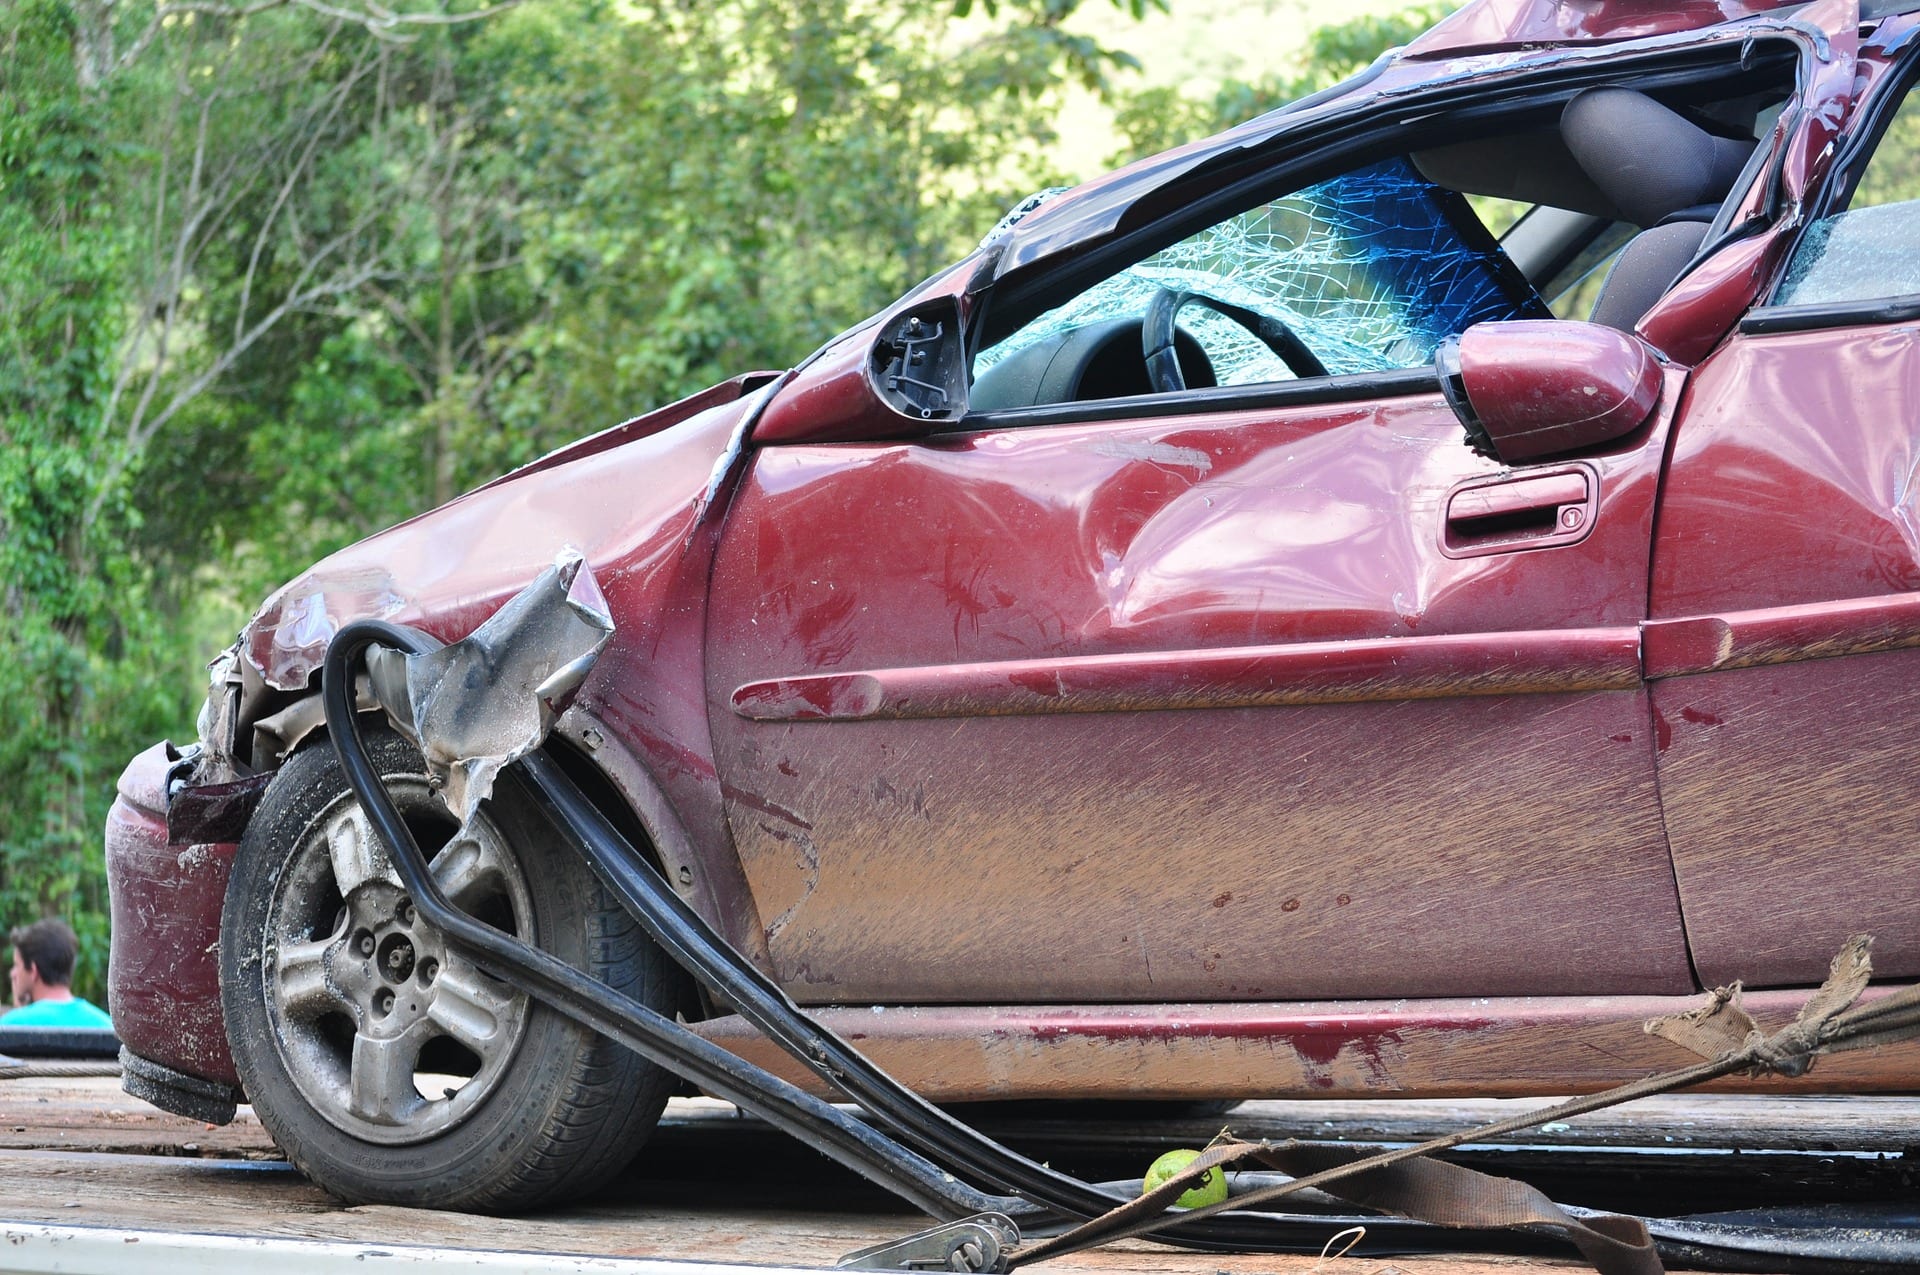 Maroon car with front-end and side collision damage; image by NettoFigueiredo, via pixabay.com.